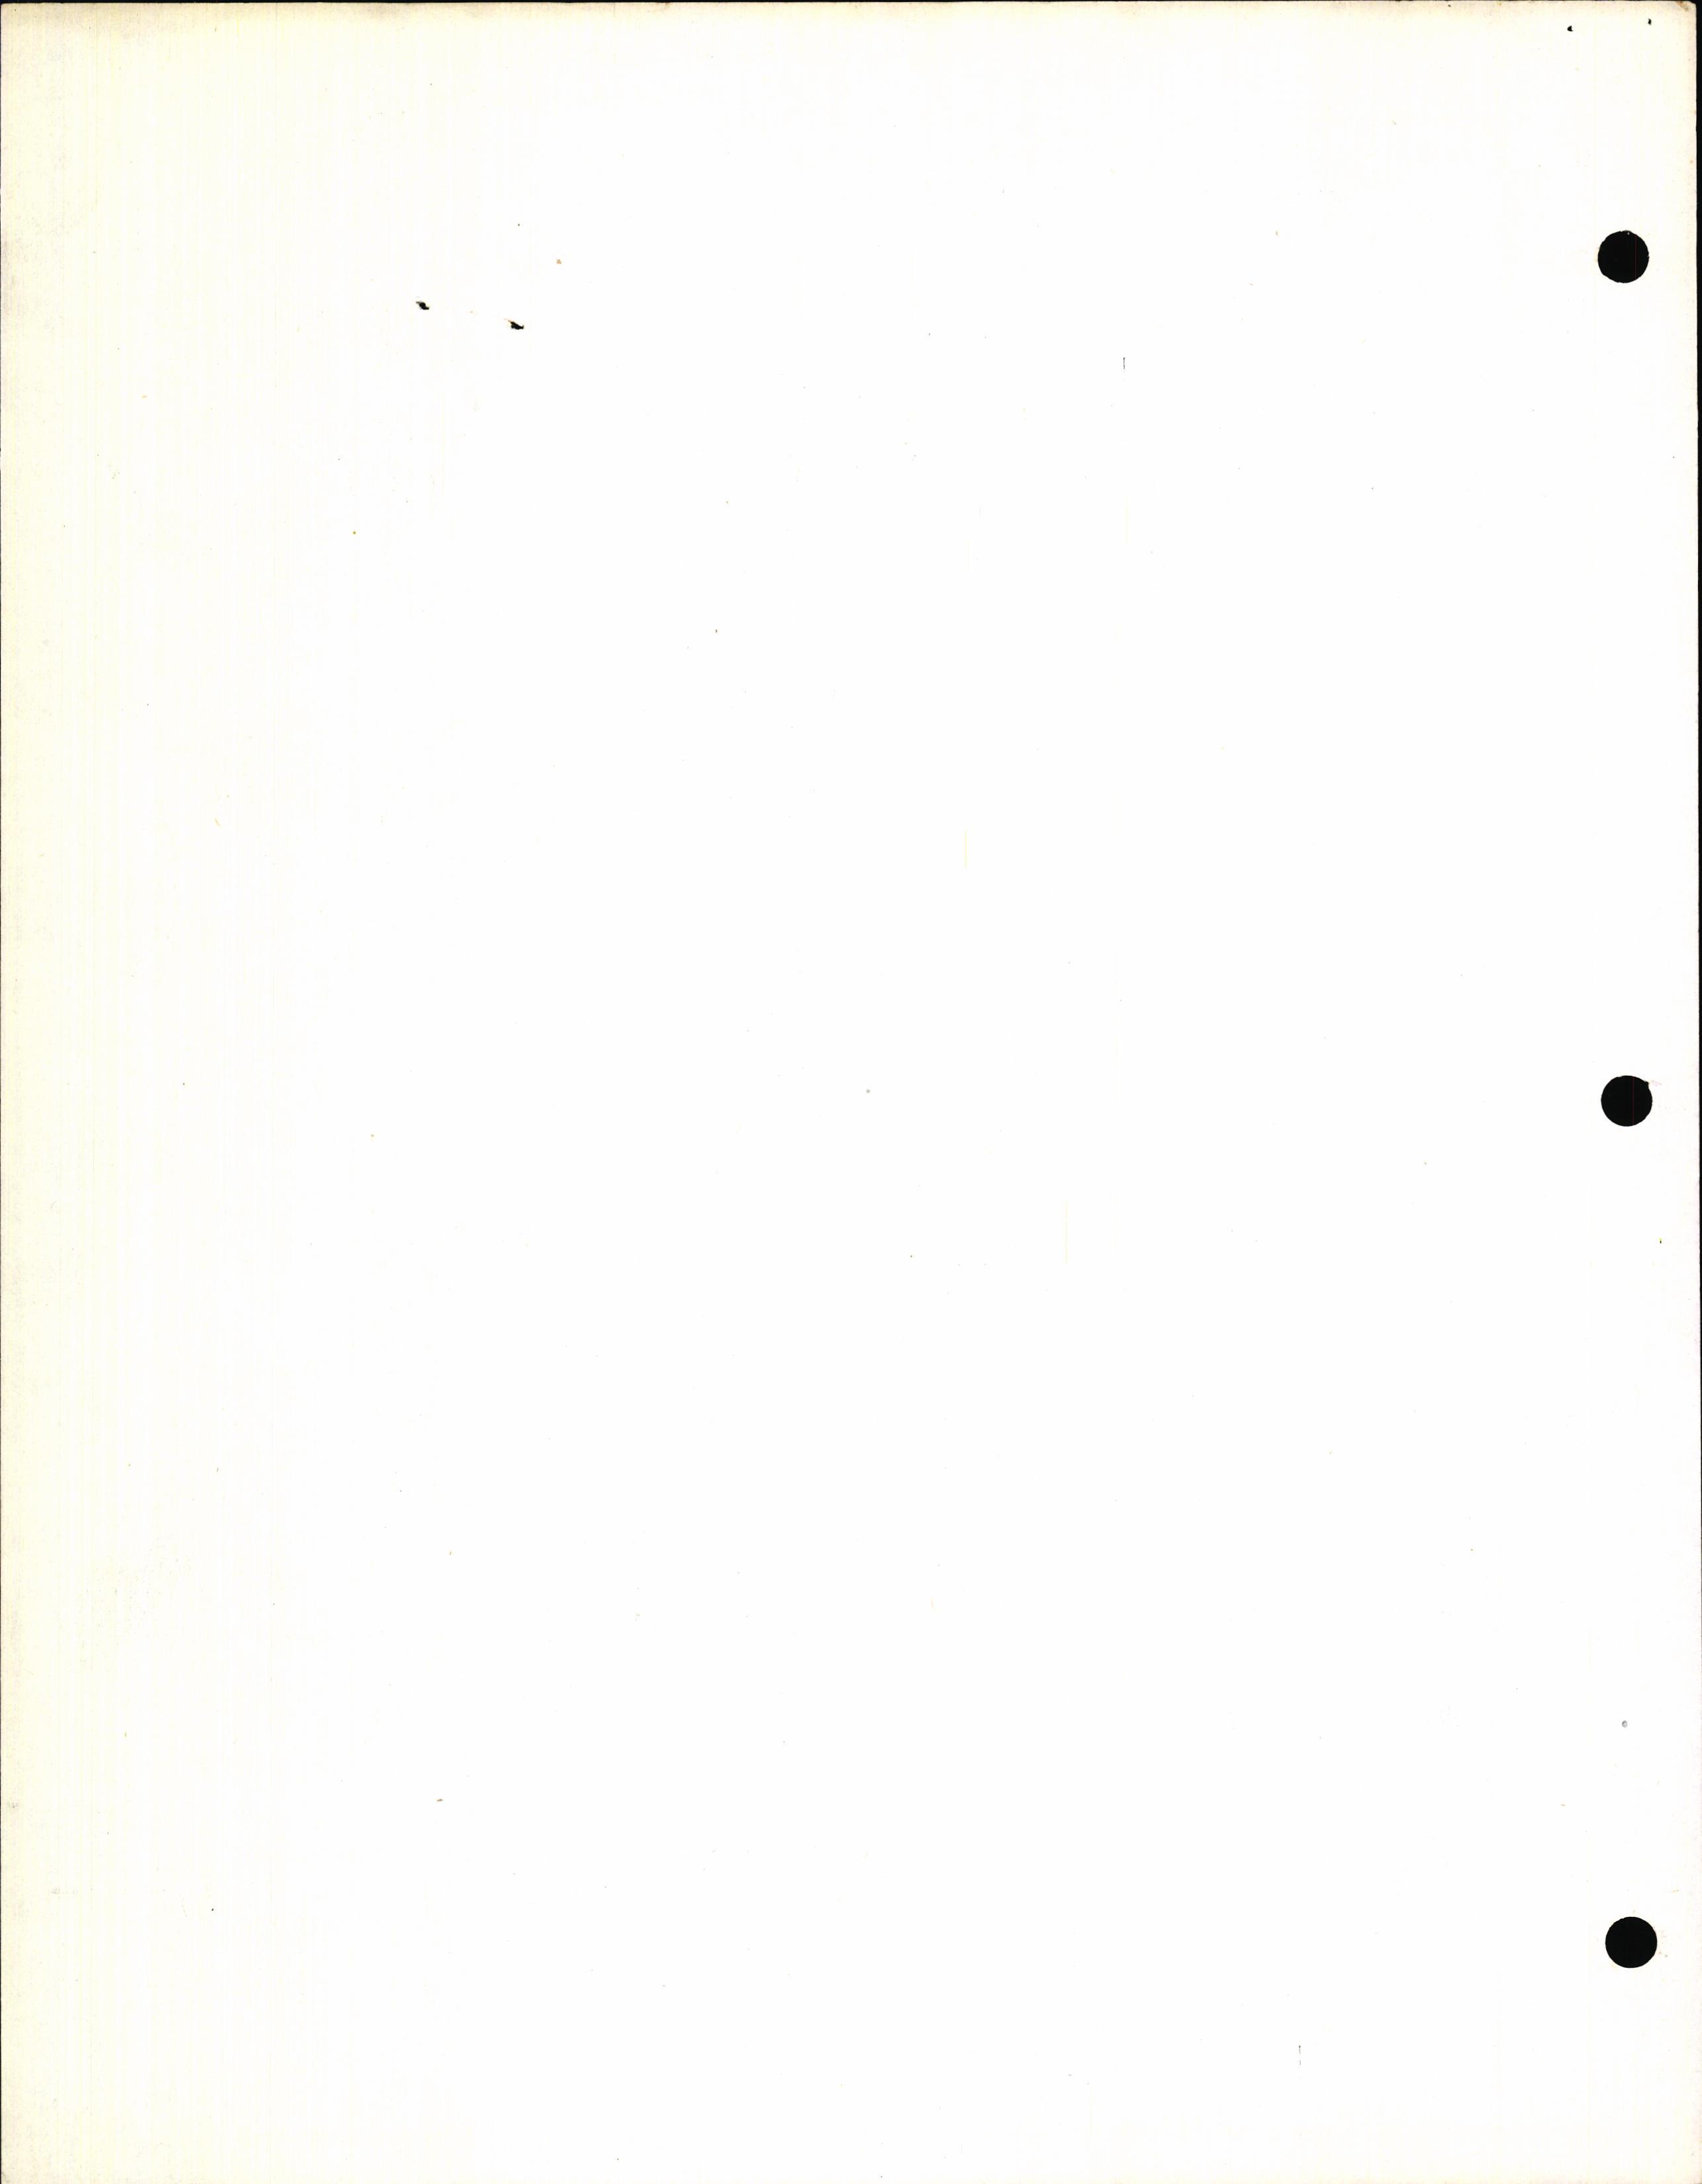 Sample page 4 from AirCorps Library document: Technical Information for Serial Number 2081